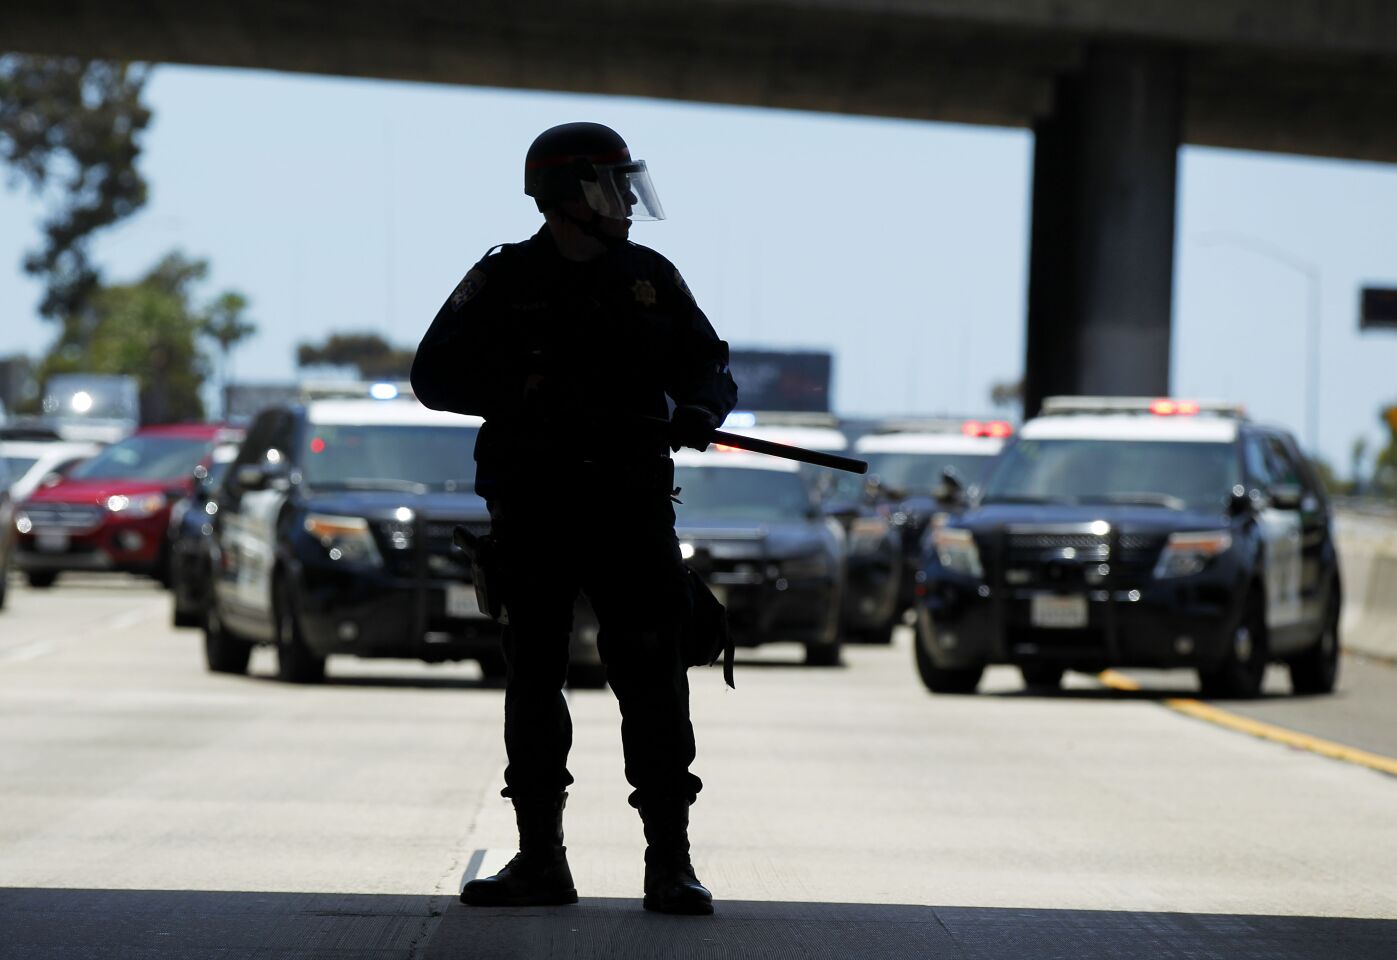 CHP officers in riot gear tried to stop a group of protesters on the I-5 in the East Village of San Diego on May 31, 2020.